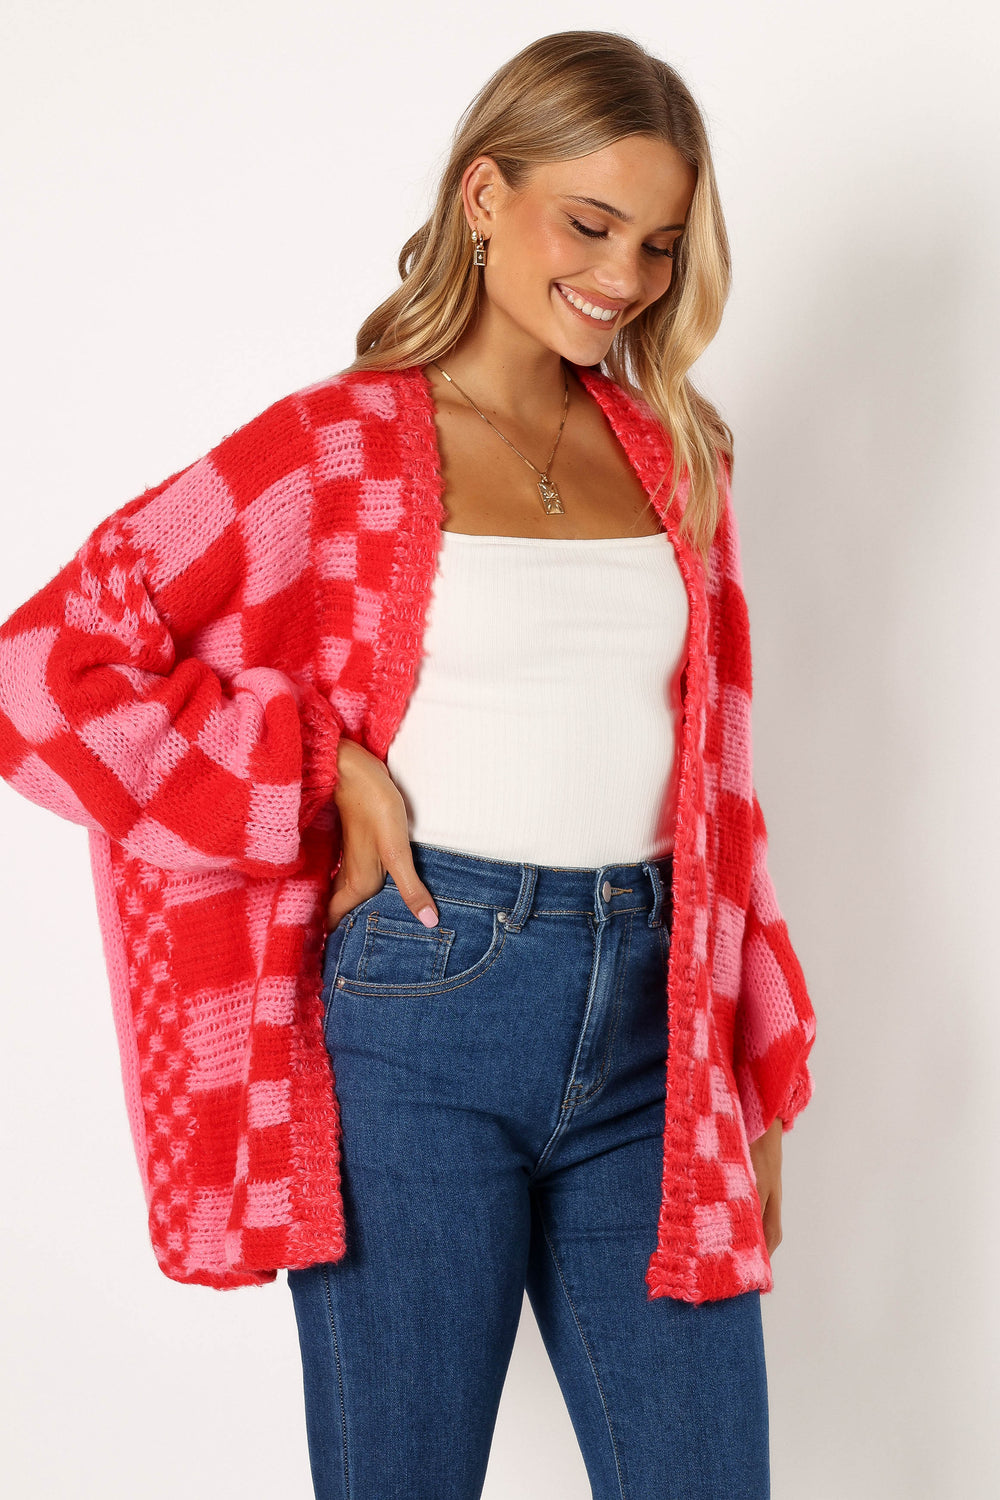 Petal and Pup USA KNITWEAR Davina Pattern Open Front Cardigan - Red/Pink